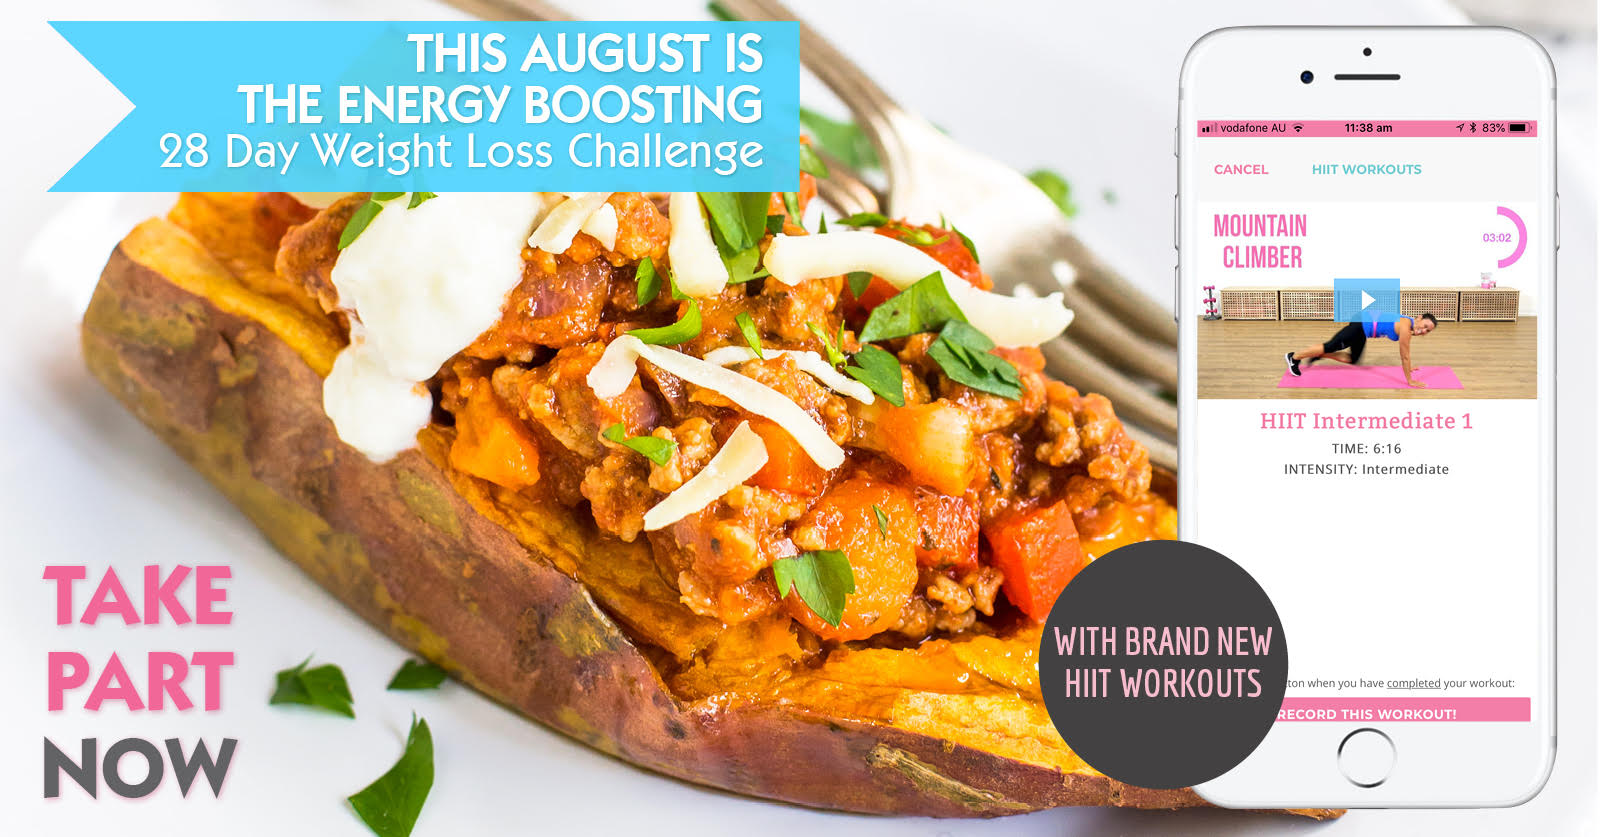 This August is the Energy Boosting Challenge Take Part Now